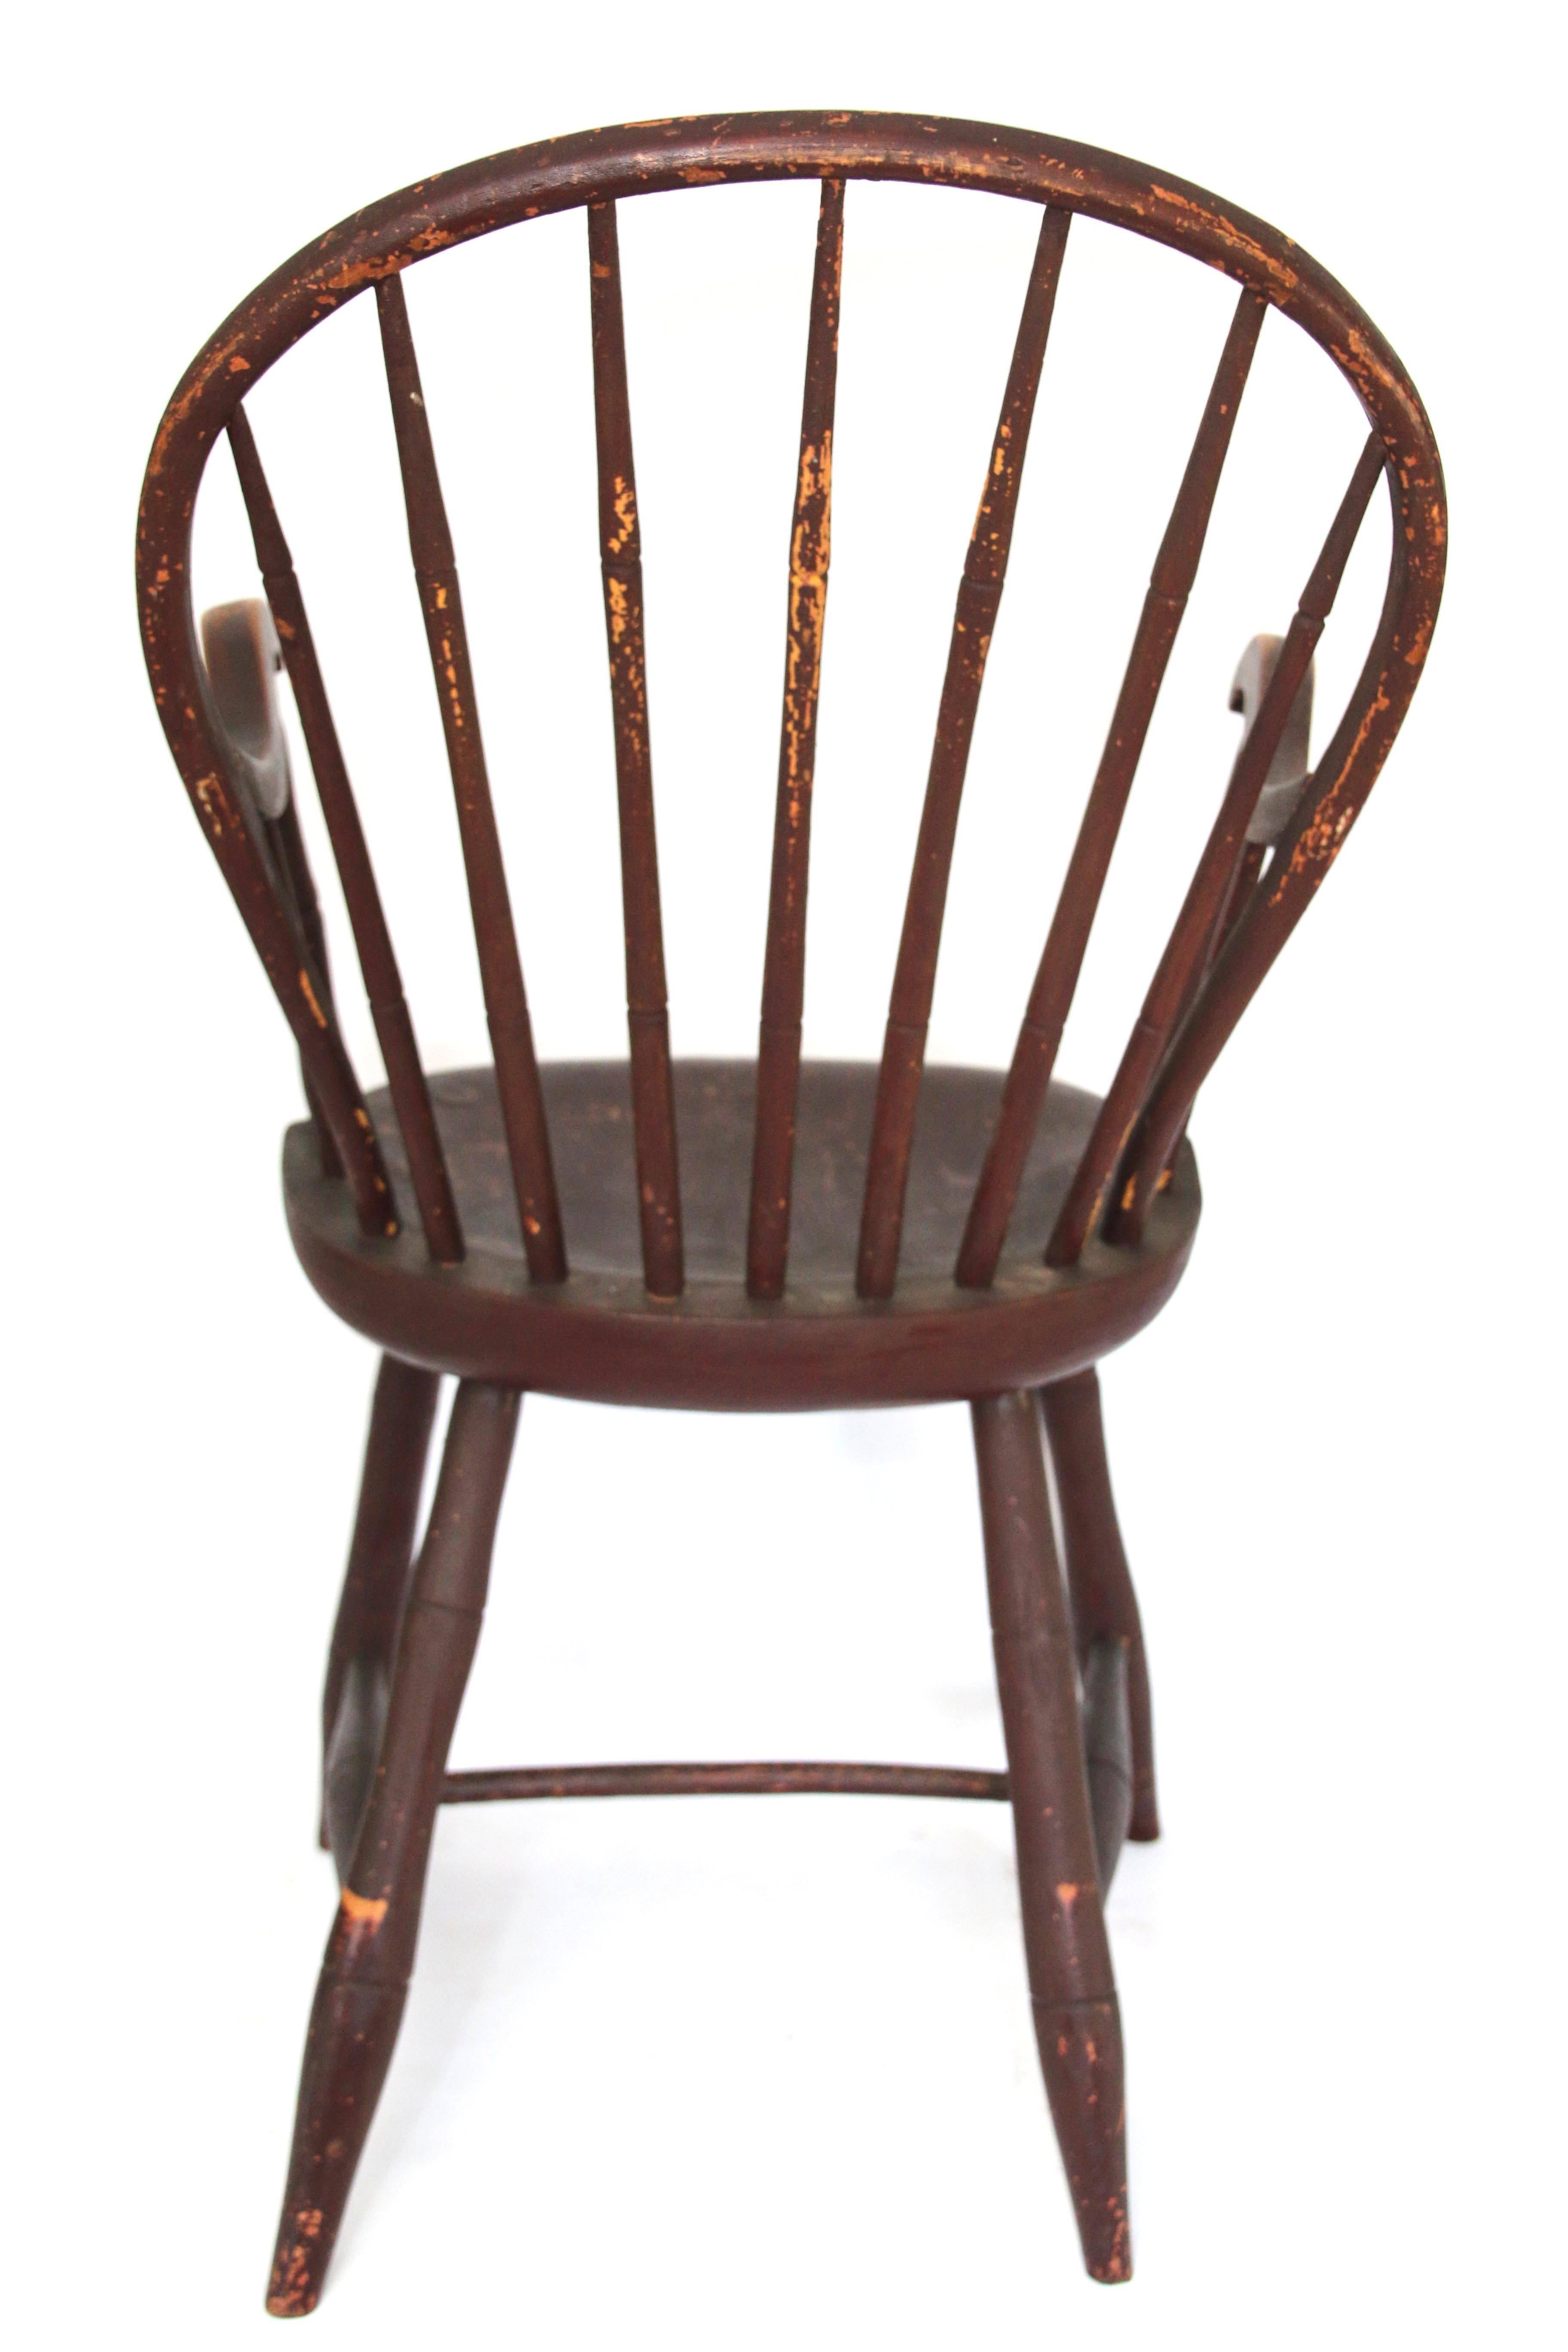 Early 19th Century Pennsylvania Oxblood Red Bowback Windsor Armchair For Sale 2